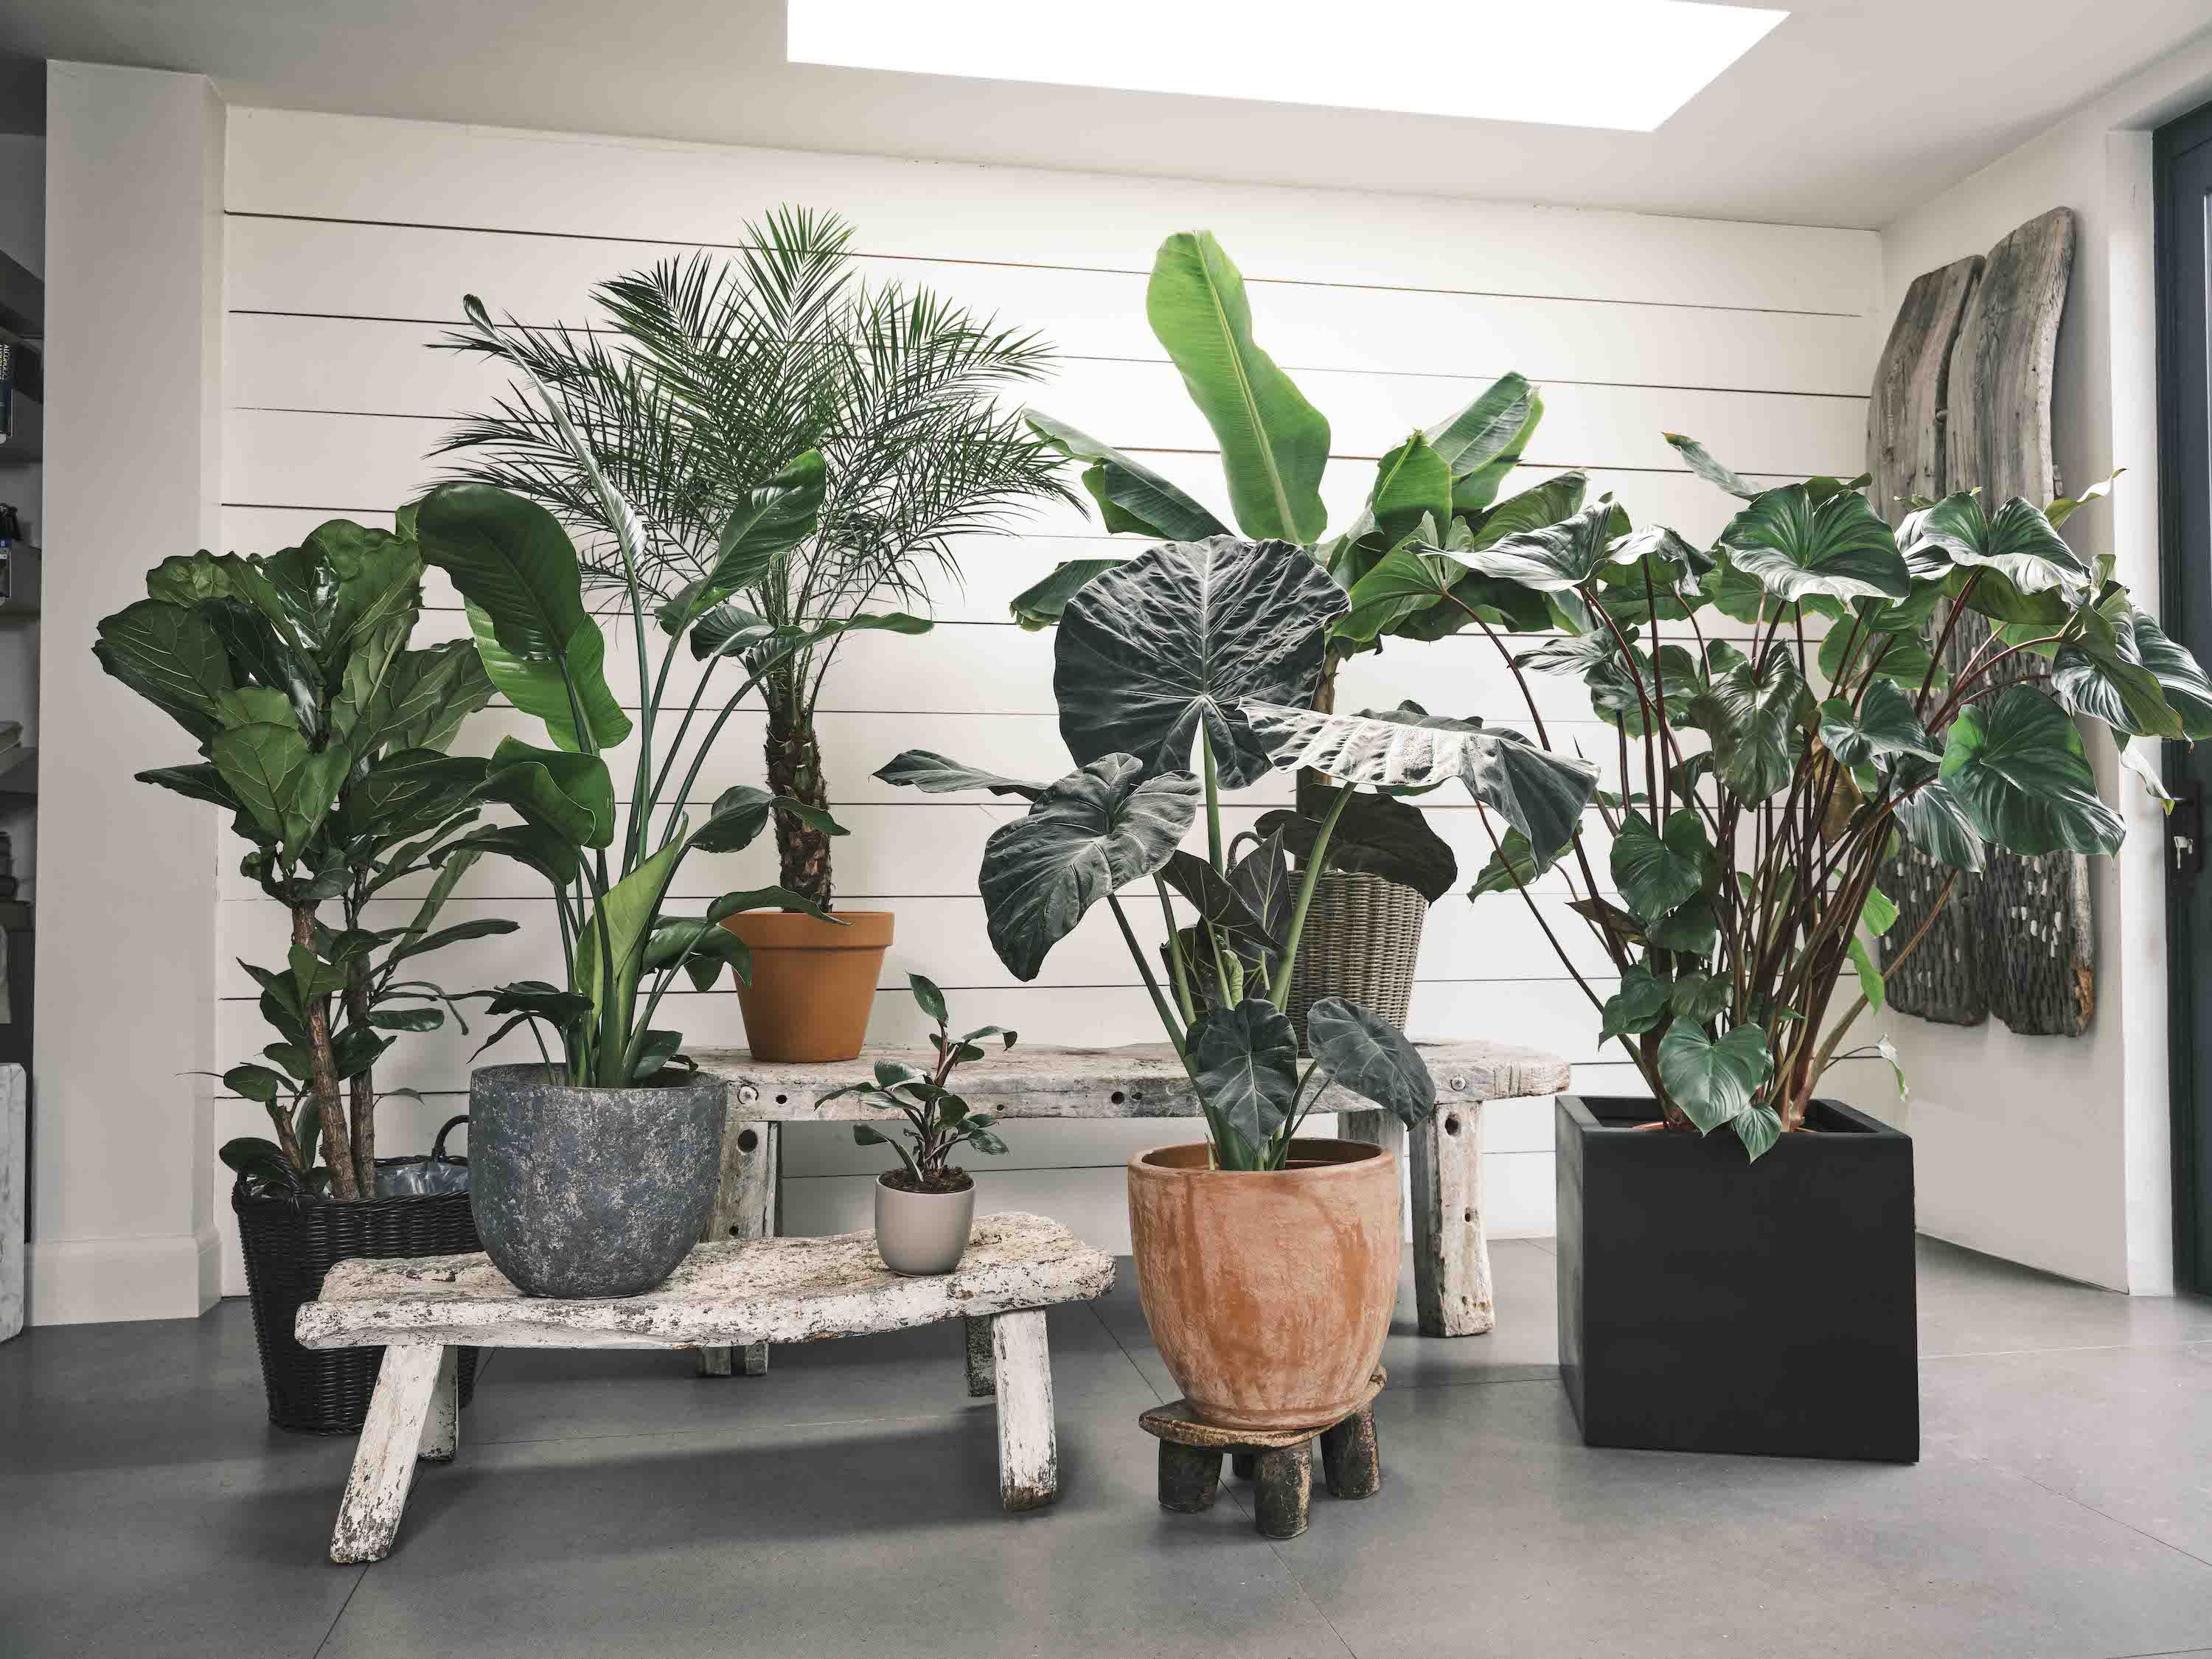 Recreate Kew Gardens' iconic Palm House look with the new Kew x Sproutl houseplant collection